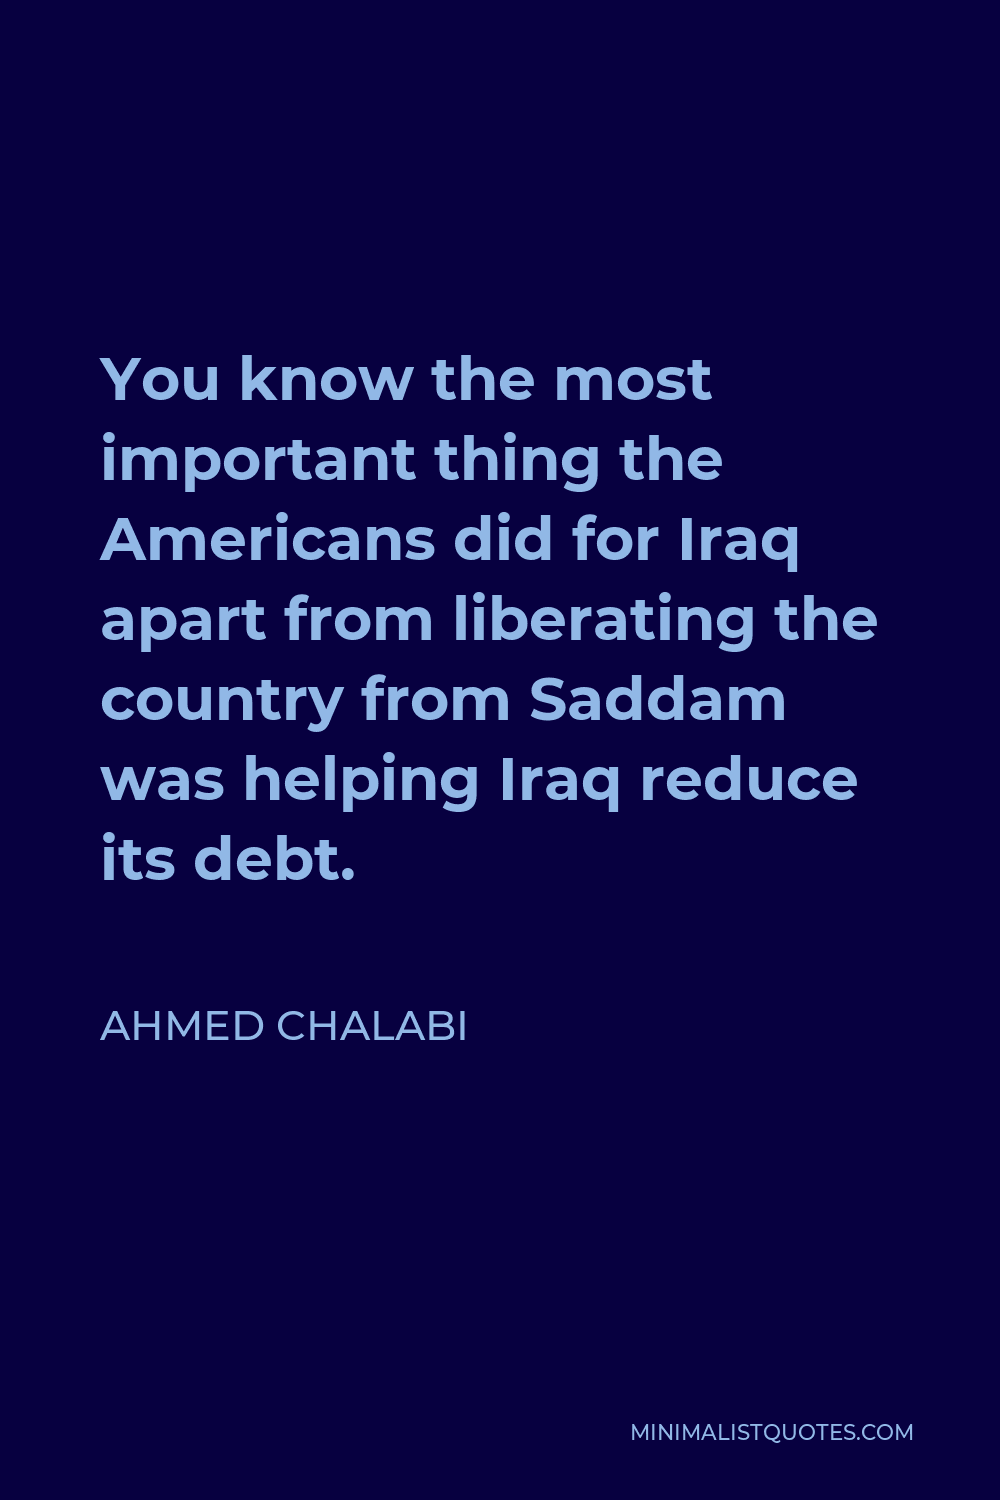 Ahmed Chalabi Quote - You know the most important thing the Americans did for Iraq apart from liberating the country from Saddam was helping Iraq reduce its debt.